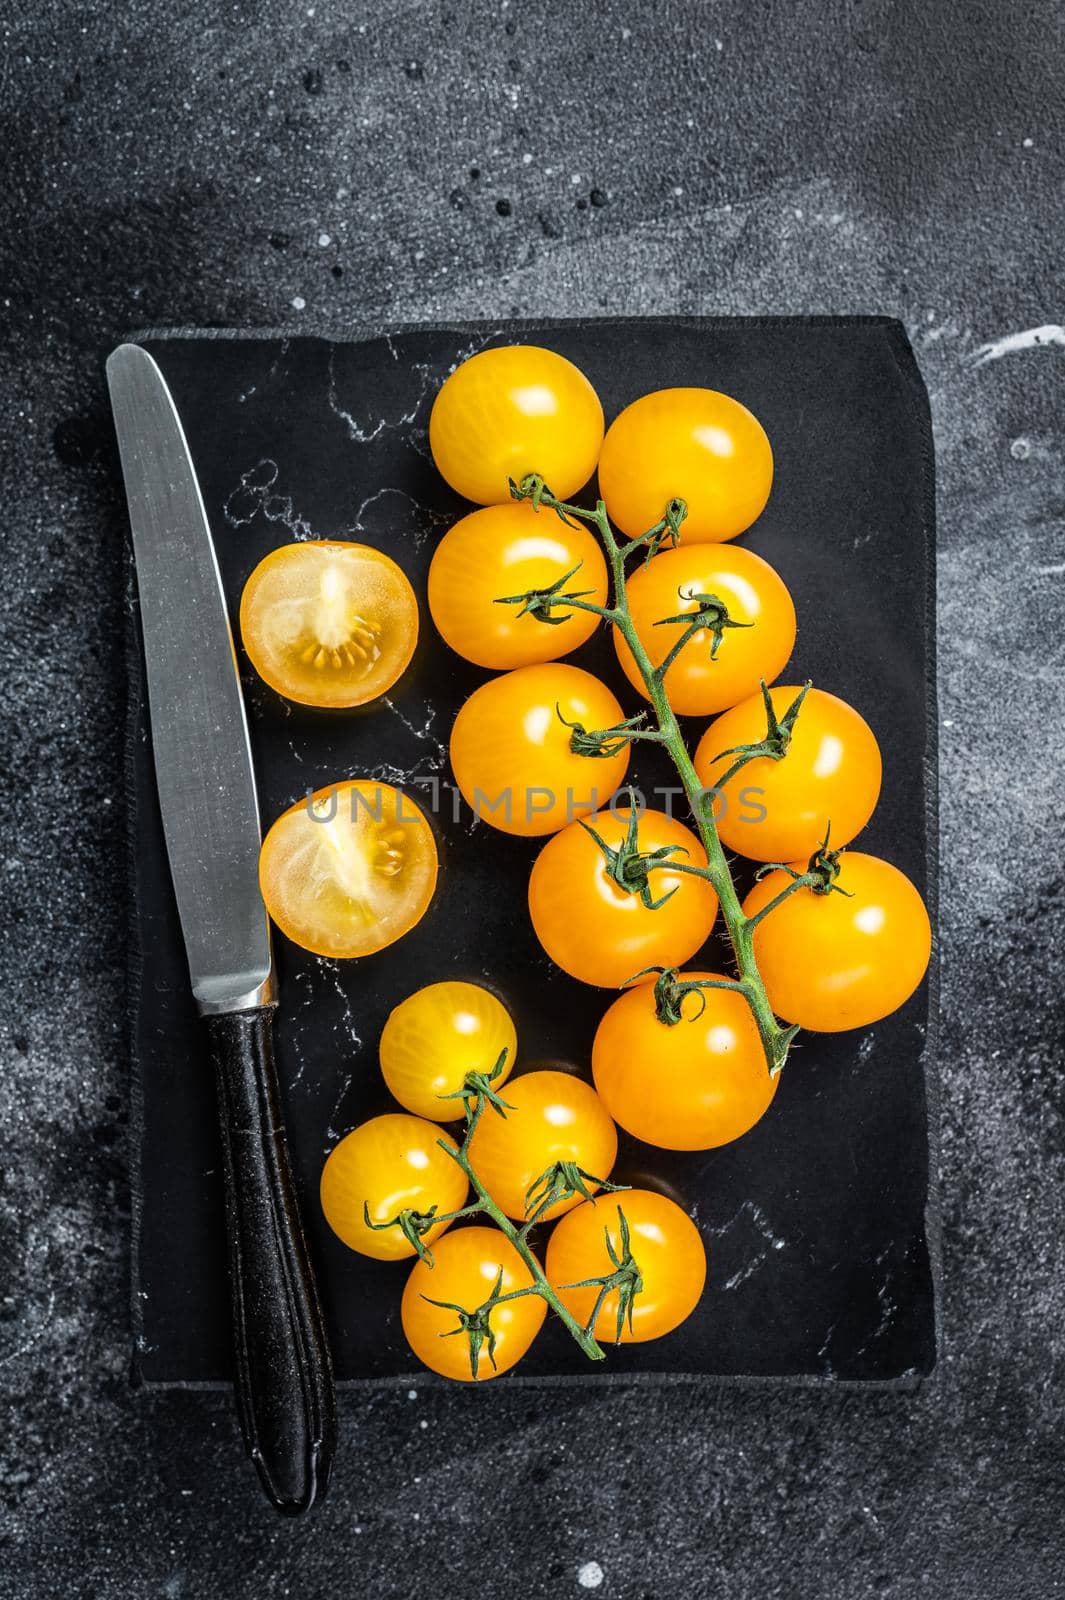 Bunch of yellow cherry tomato on a marble board. Black background. Top view by Composter